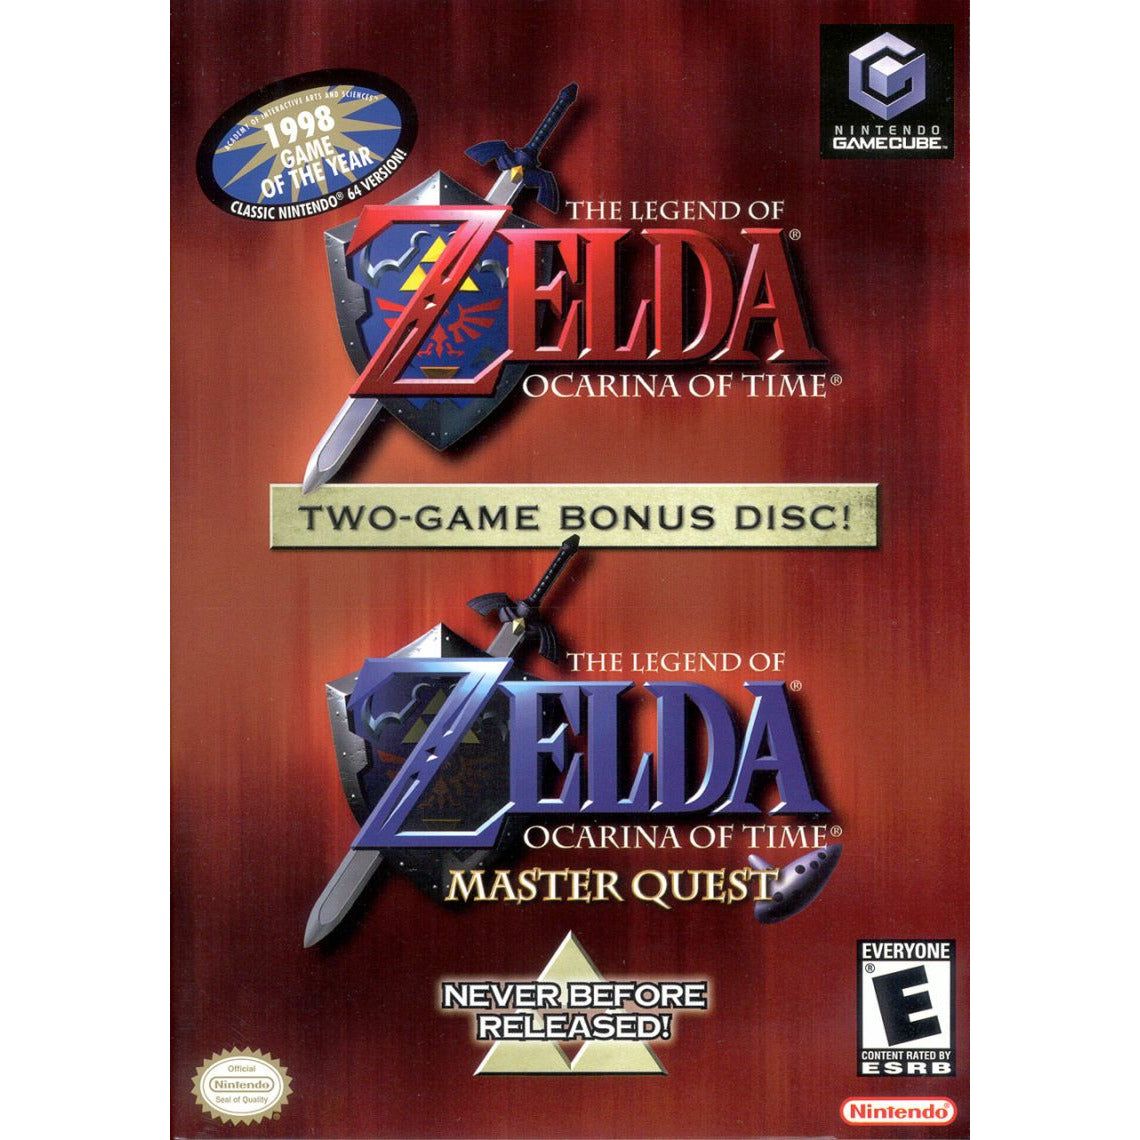 GameCube - Legend Of Zelda Wind Waker W/ Ocarina of Time and Master Quest